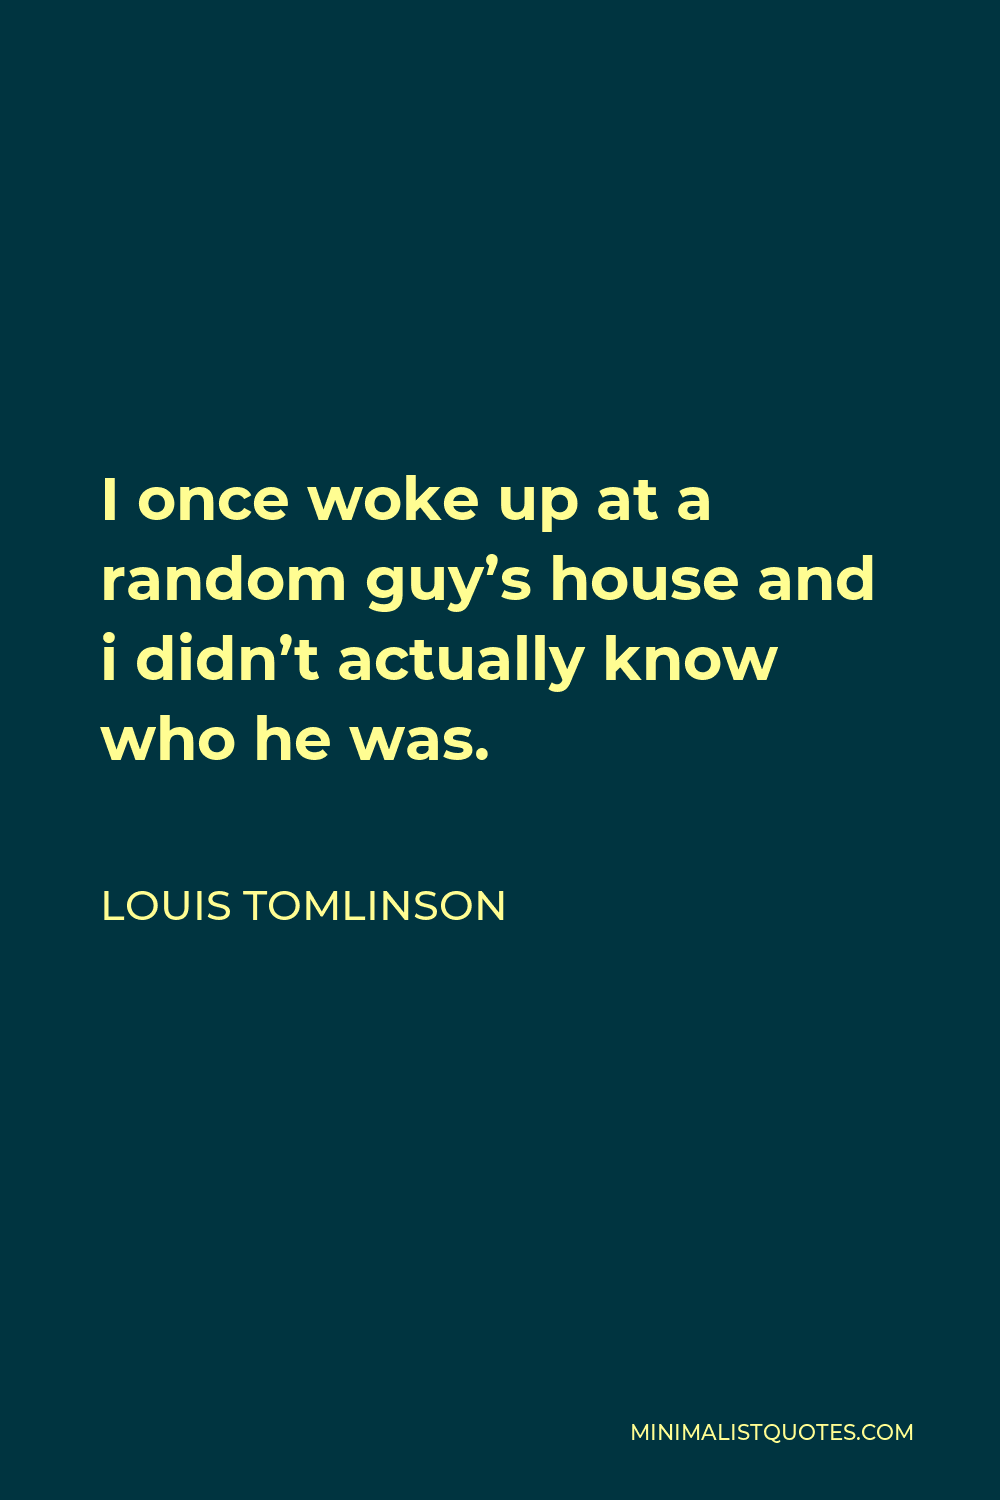 Louis Tomlinson Quote - I once woke up at a random guy’s house and i didn’t actually know who he was.